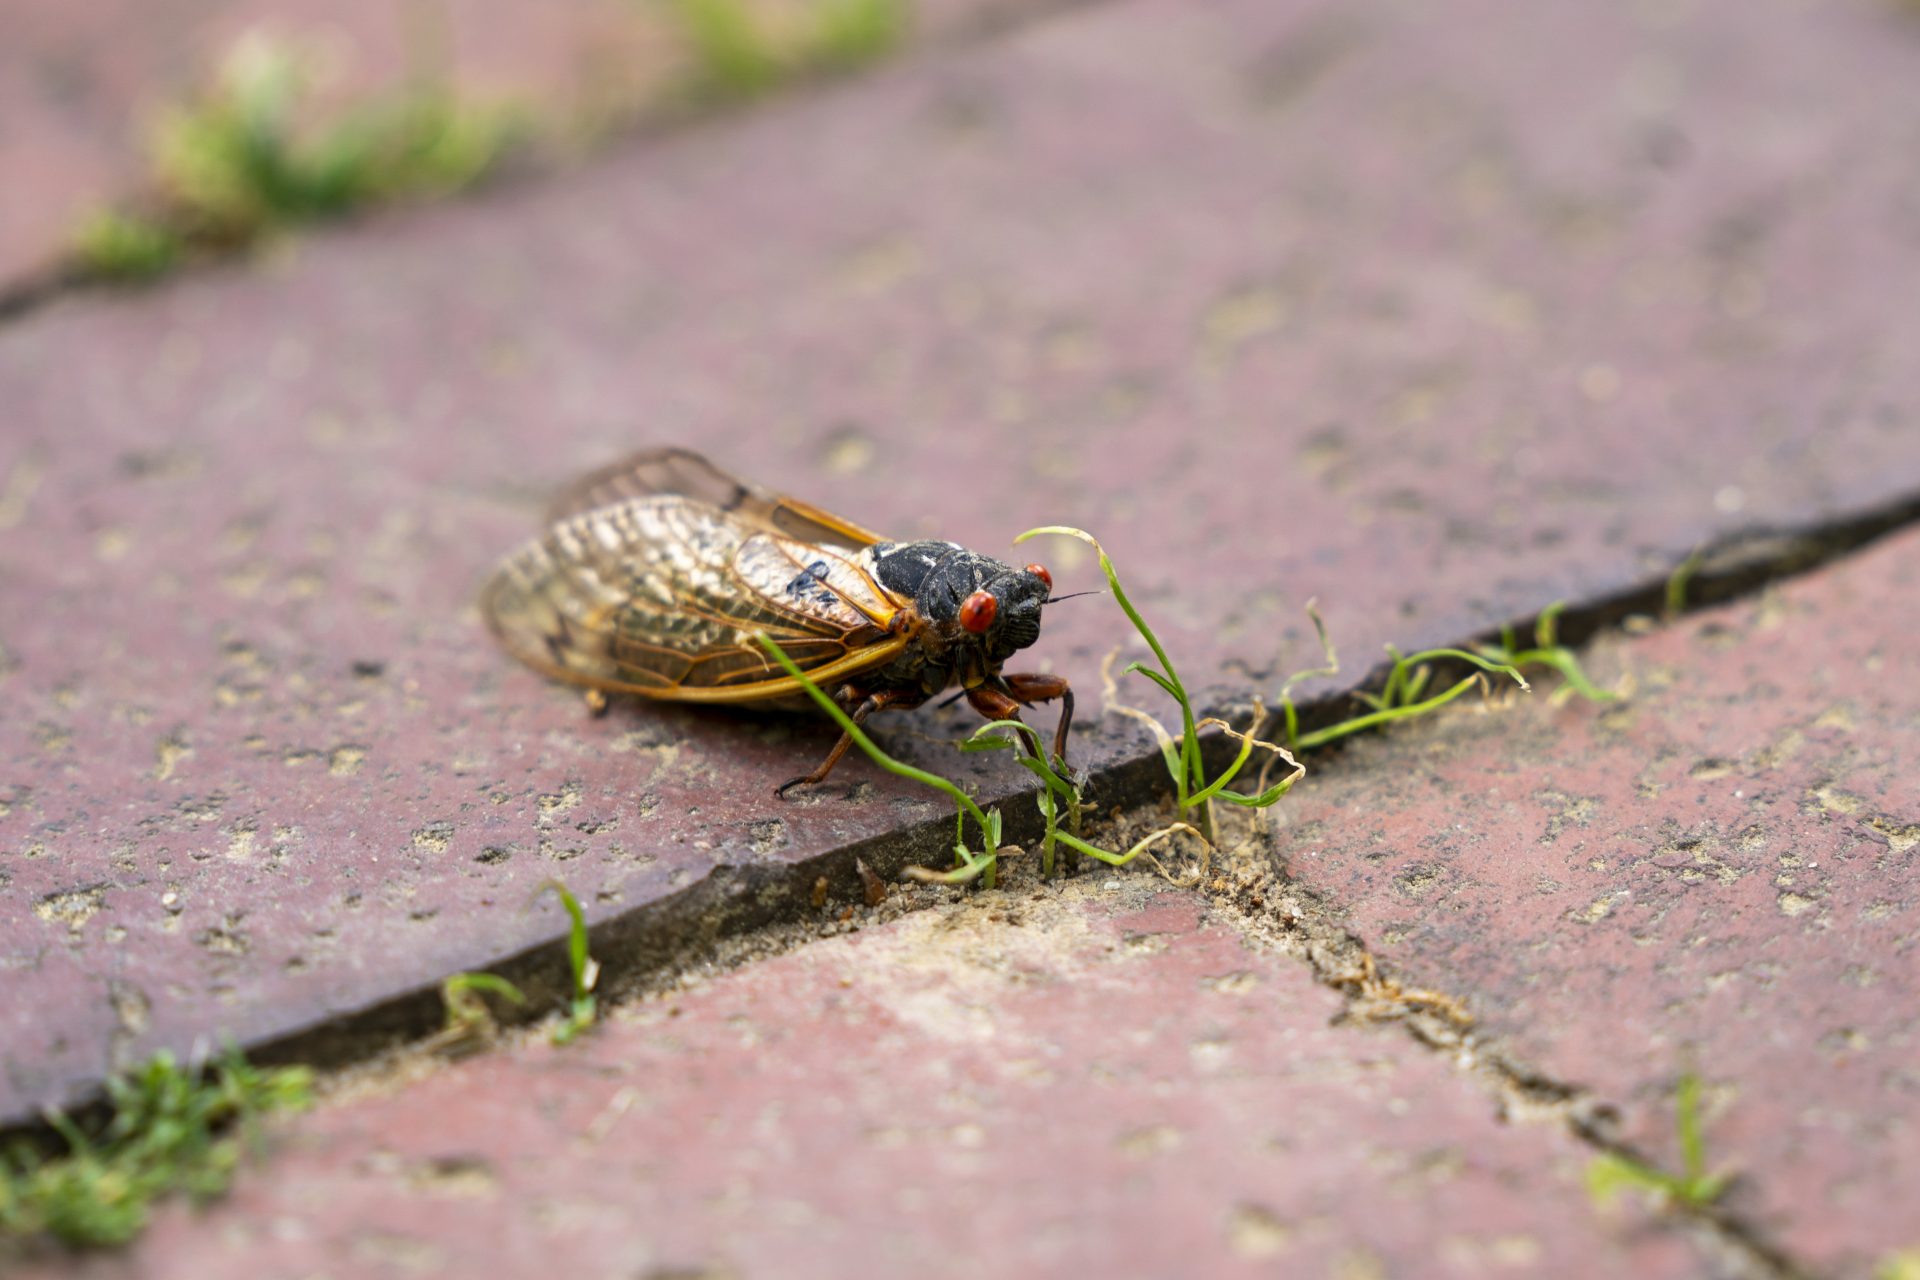 Swarms of noisy bugs are now starting to cover parts of the United States